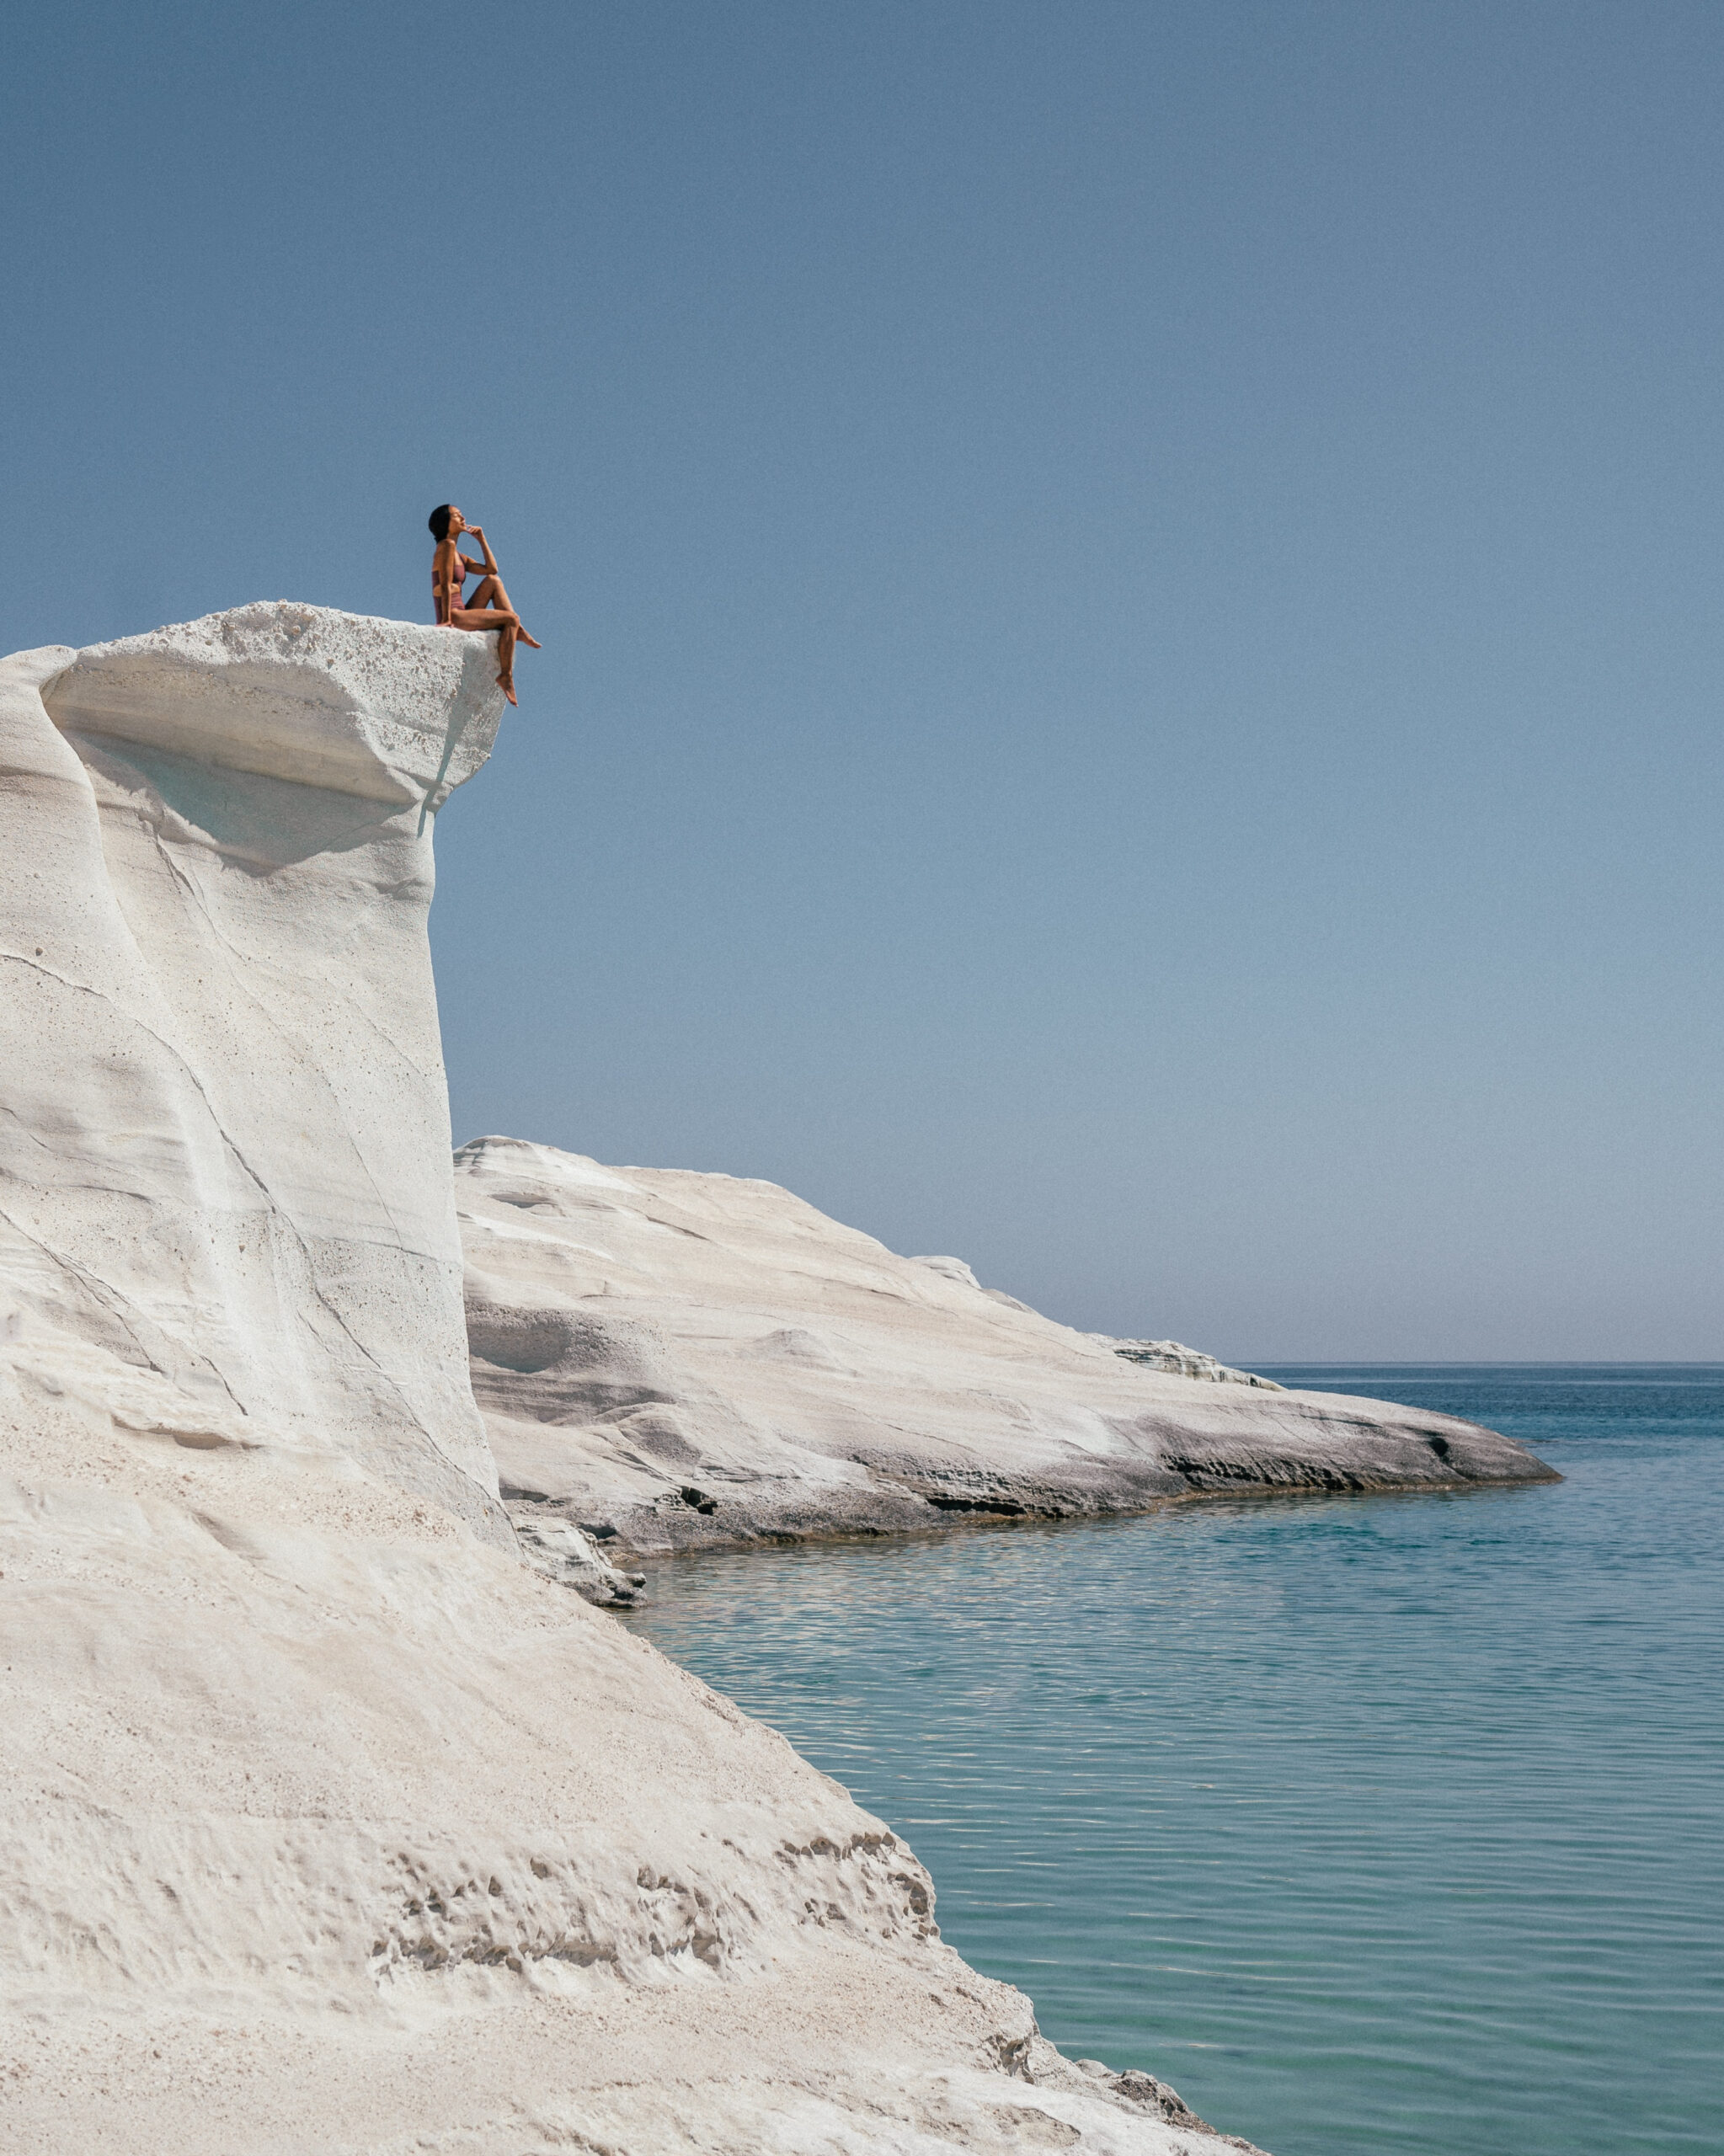 The ultimate travel guide to the Greek island of Milos including the best beaches, villages, restaurants, day trips, hotels and more.